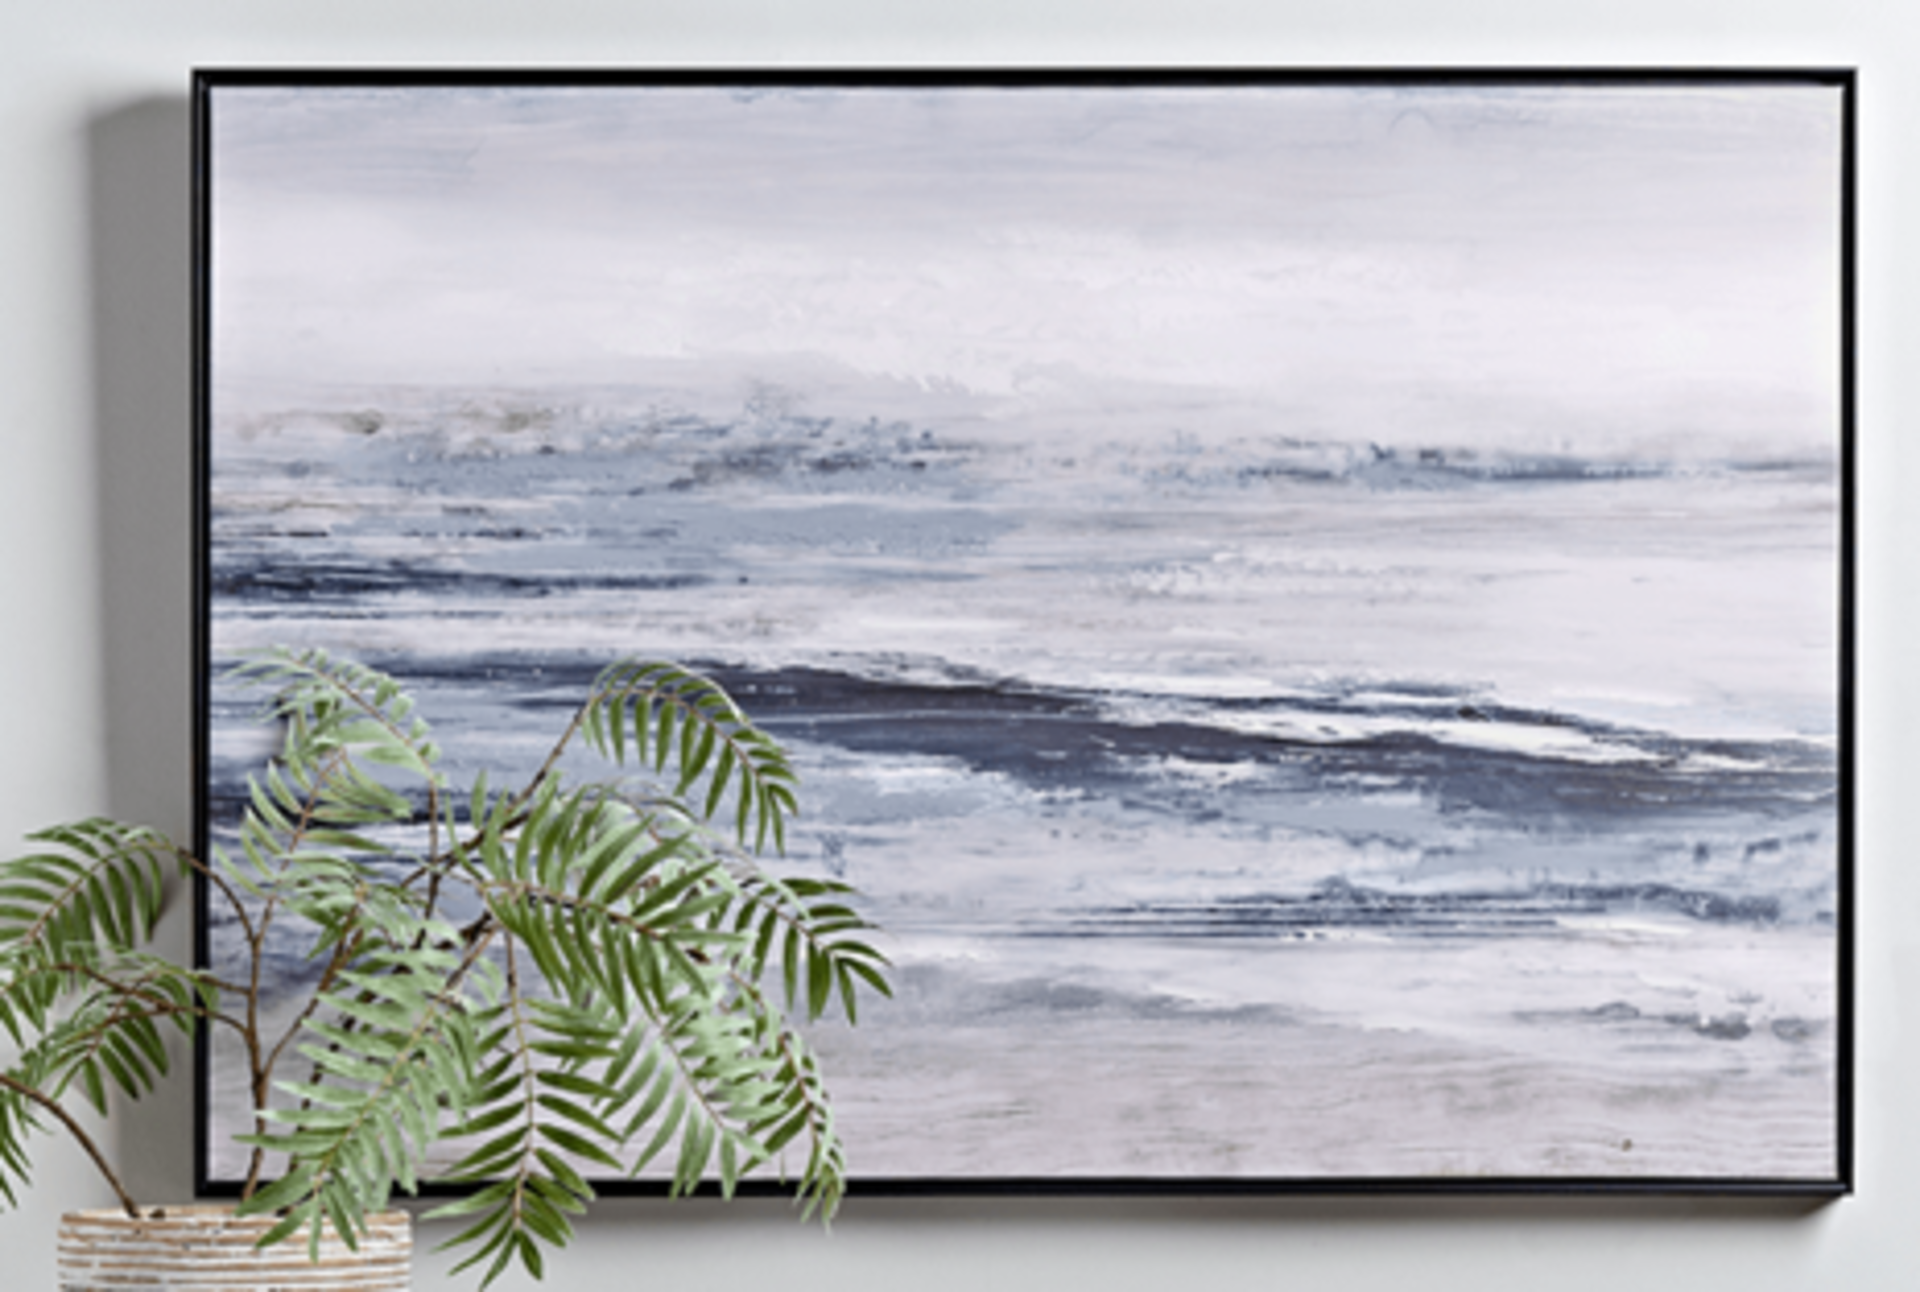 Ocean Abstract Canvas. RRP £250.00. - SR5. Depicting an open ocean scene with a choppy, clear blue